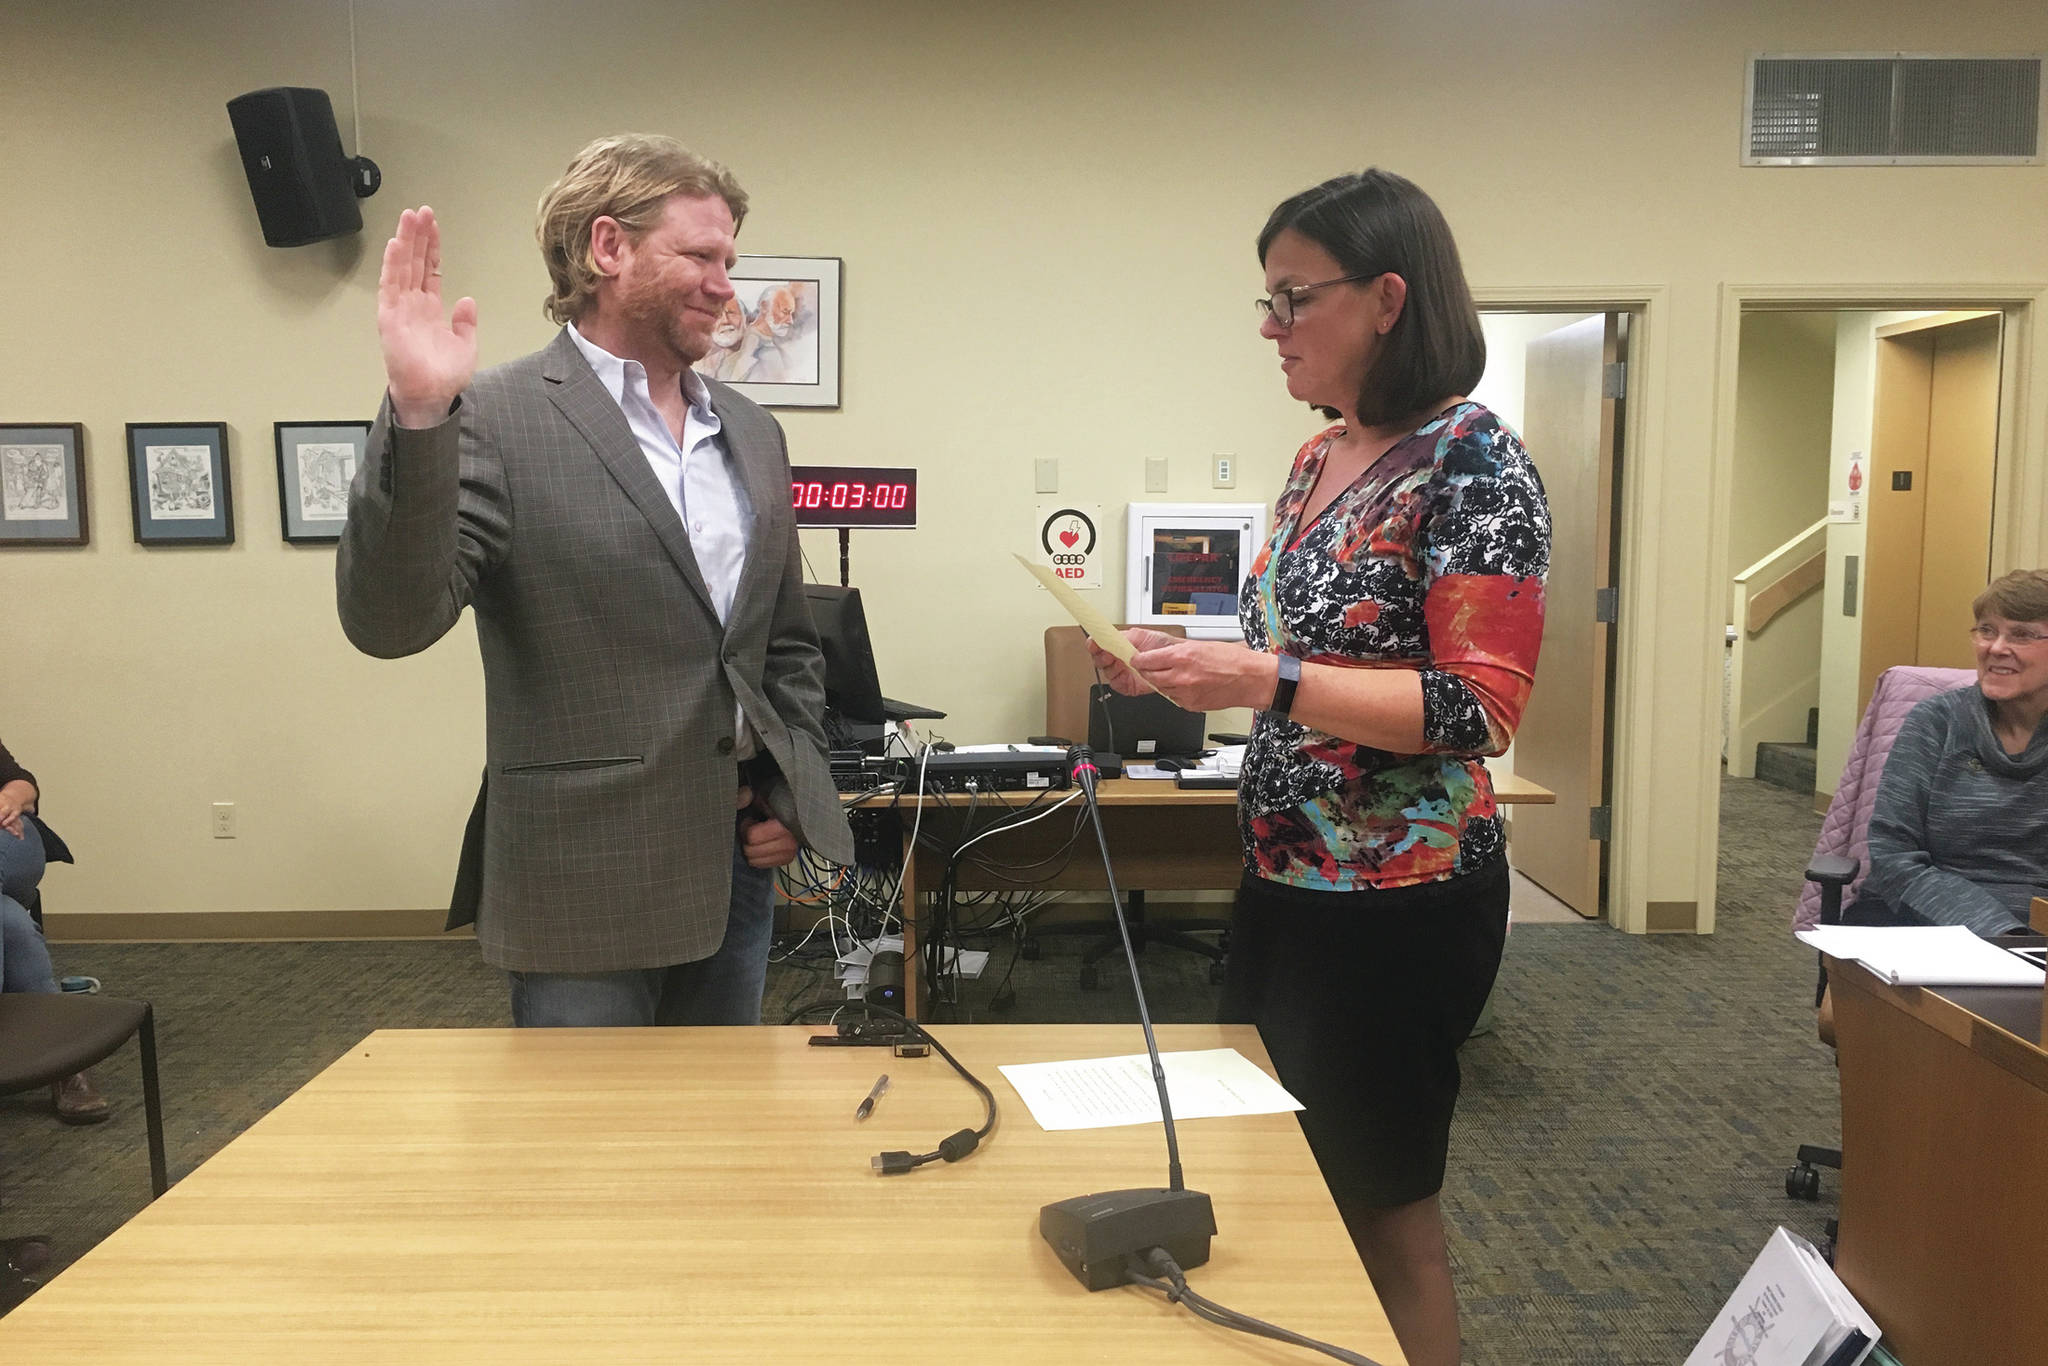 Joey Evensen is sworn in as a new member of the Homer City Council by City Clerk Melissa Jacobsen at a Monday, Oct. 14, 2019 council meeting at Homer City Hall in Homer, Alaska. Evensen won one of two open seats on the council with the majority of votes in the Oct. 1 municipal election. (Photo by Megan Pacer/Homer News)